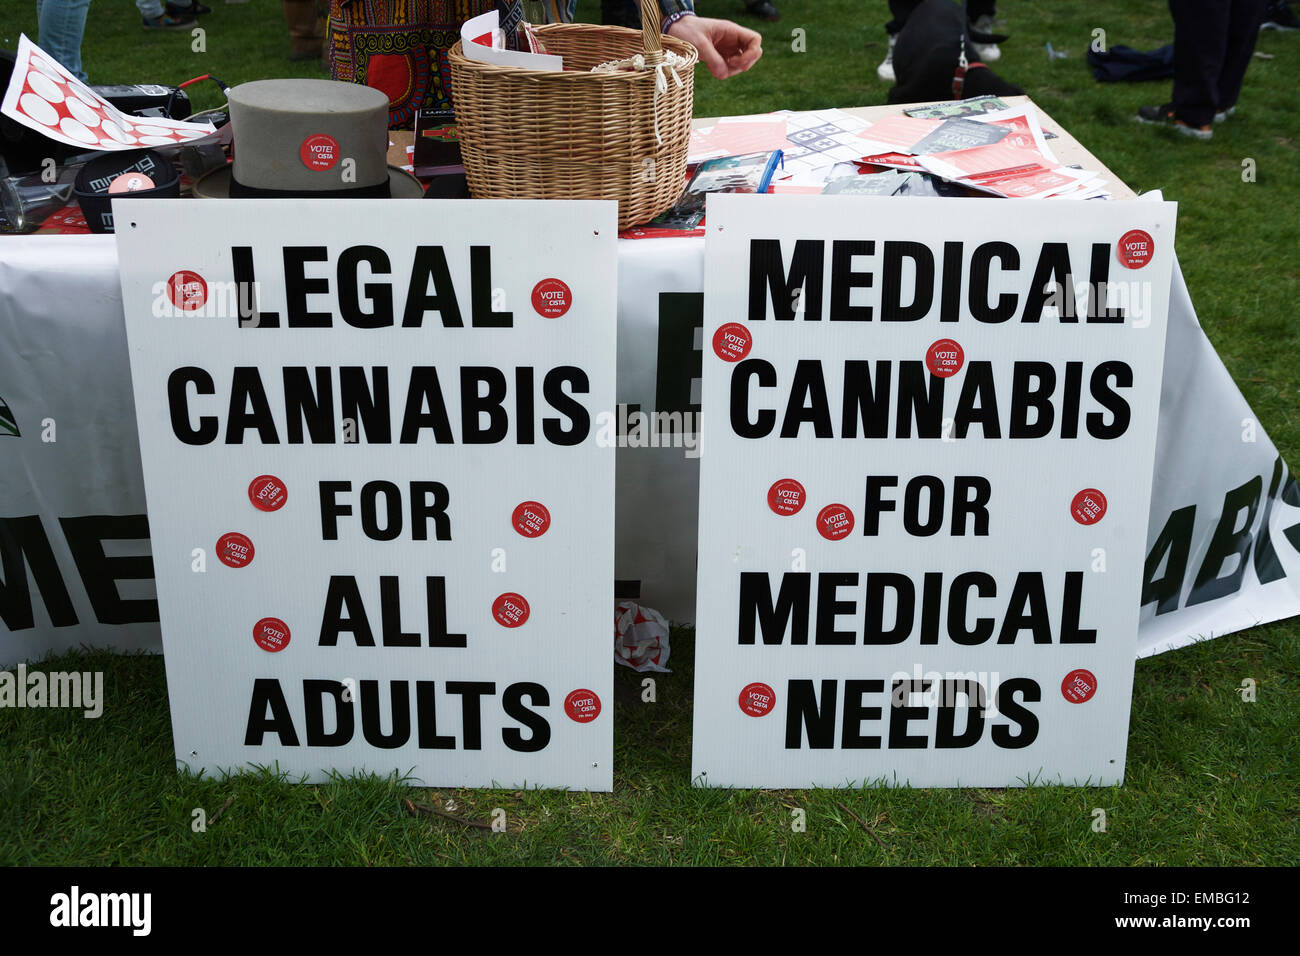 Hyde Park, London, UK, 19th April 2015. A pro cannabis festival campaigning for the legalisation of marijuana. This event is held annually attracting hundreds of people, where participants openly smoke cannabis. The term '420' has become universally known as the code word for cannabis. Cannabis medical. Stock Photo